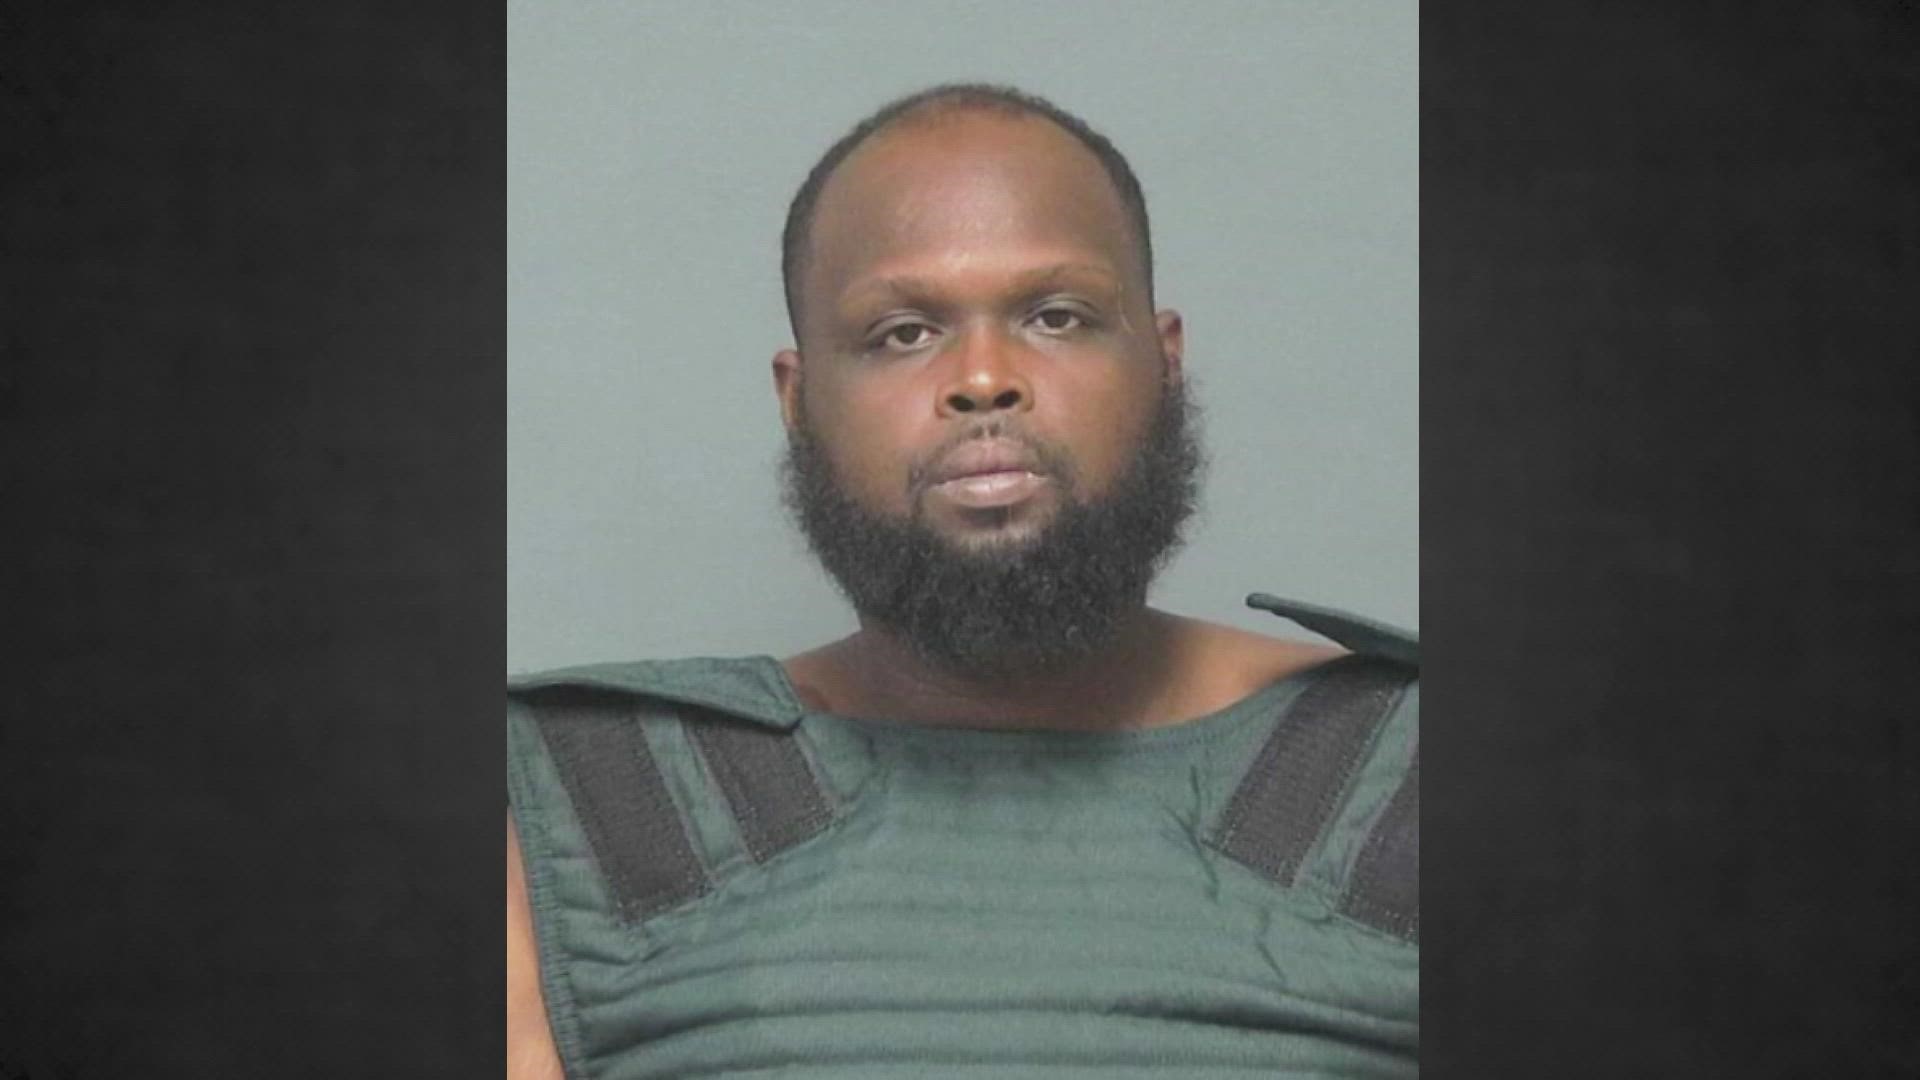 The man has been charged in connection to three separate incidents in Garland and Mesquite. Police are asking you contact them if you've been attacked by him.